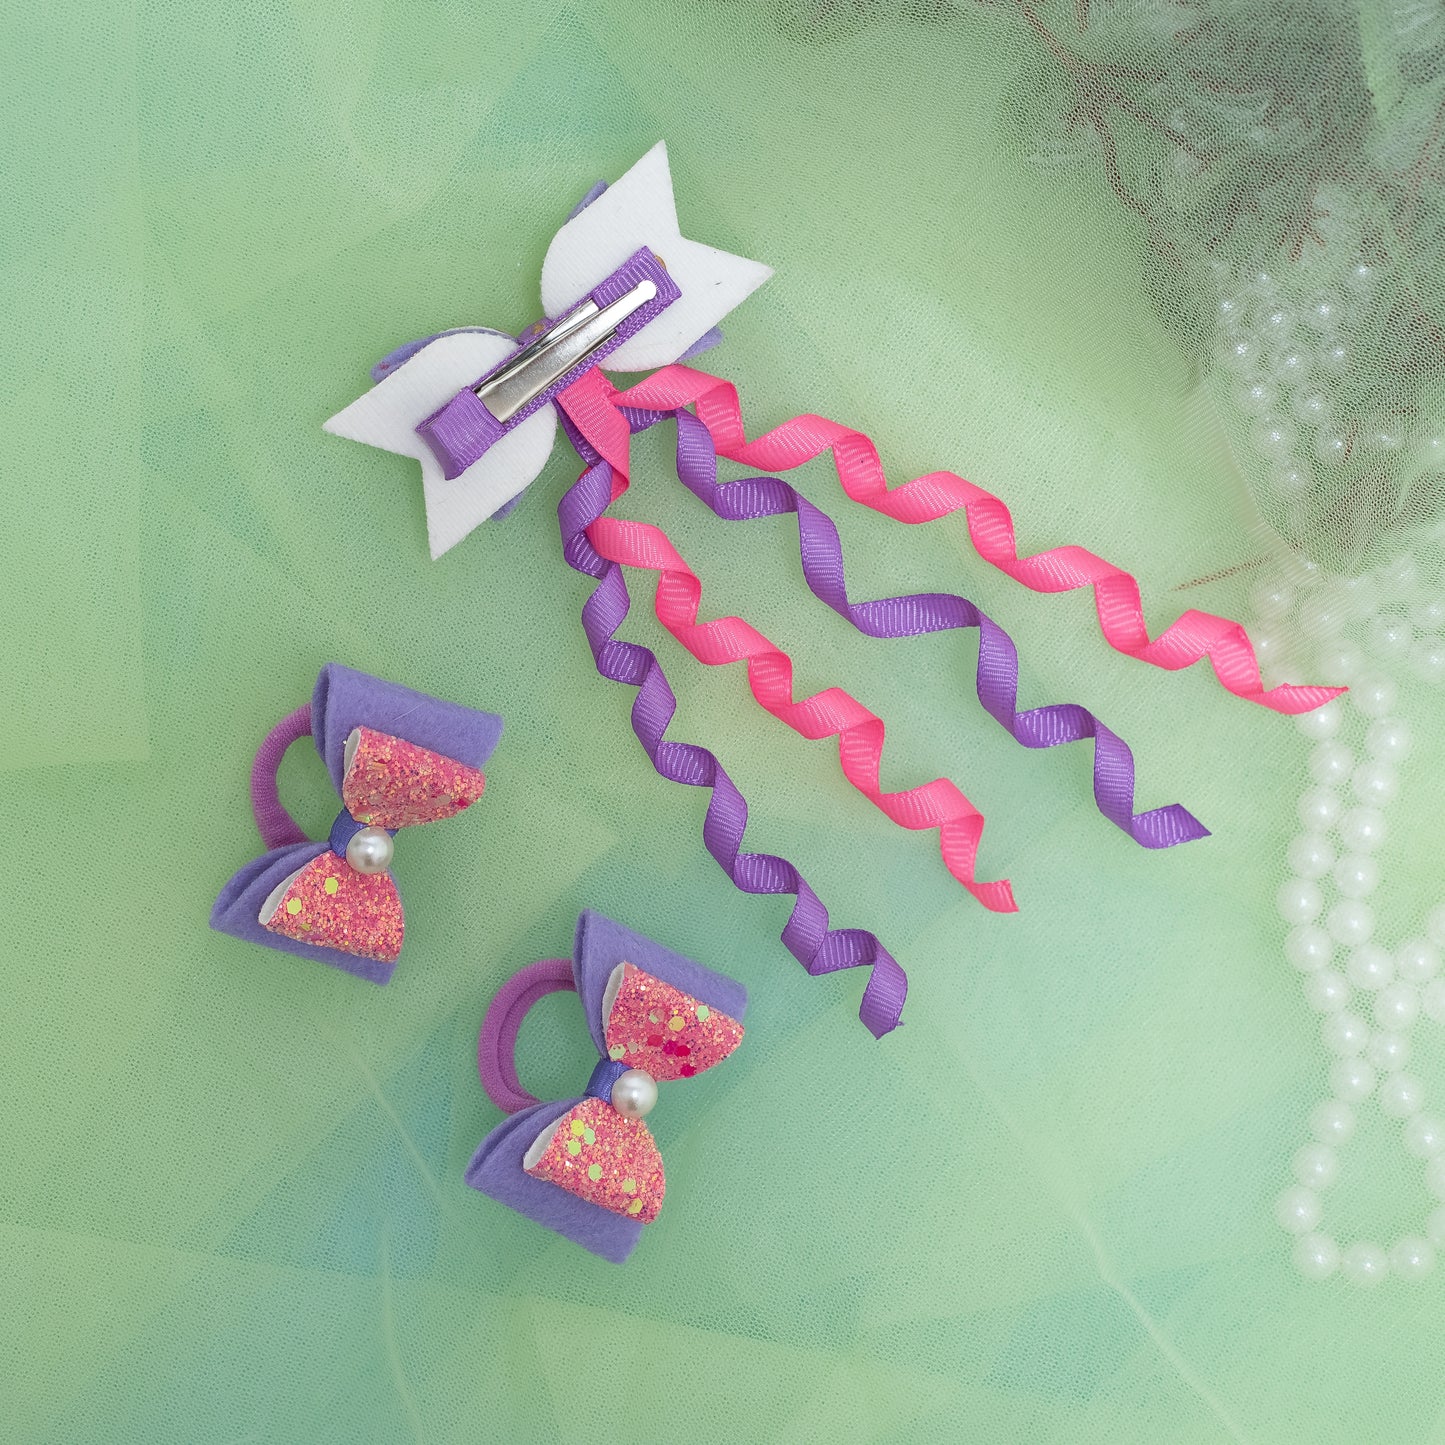 Combo: 1 Dangler Hair-pin and 2 Rubberbands with Fancy Shimmer Bow for Party -  Pink, Purple (Set of 1 pair Rubberbands , 1 Dangler on Alligator clip = 3